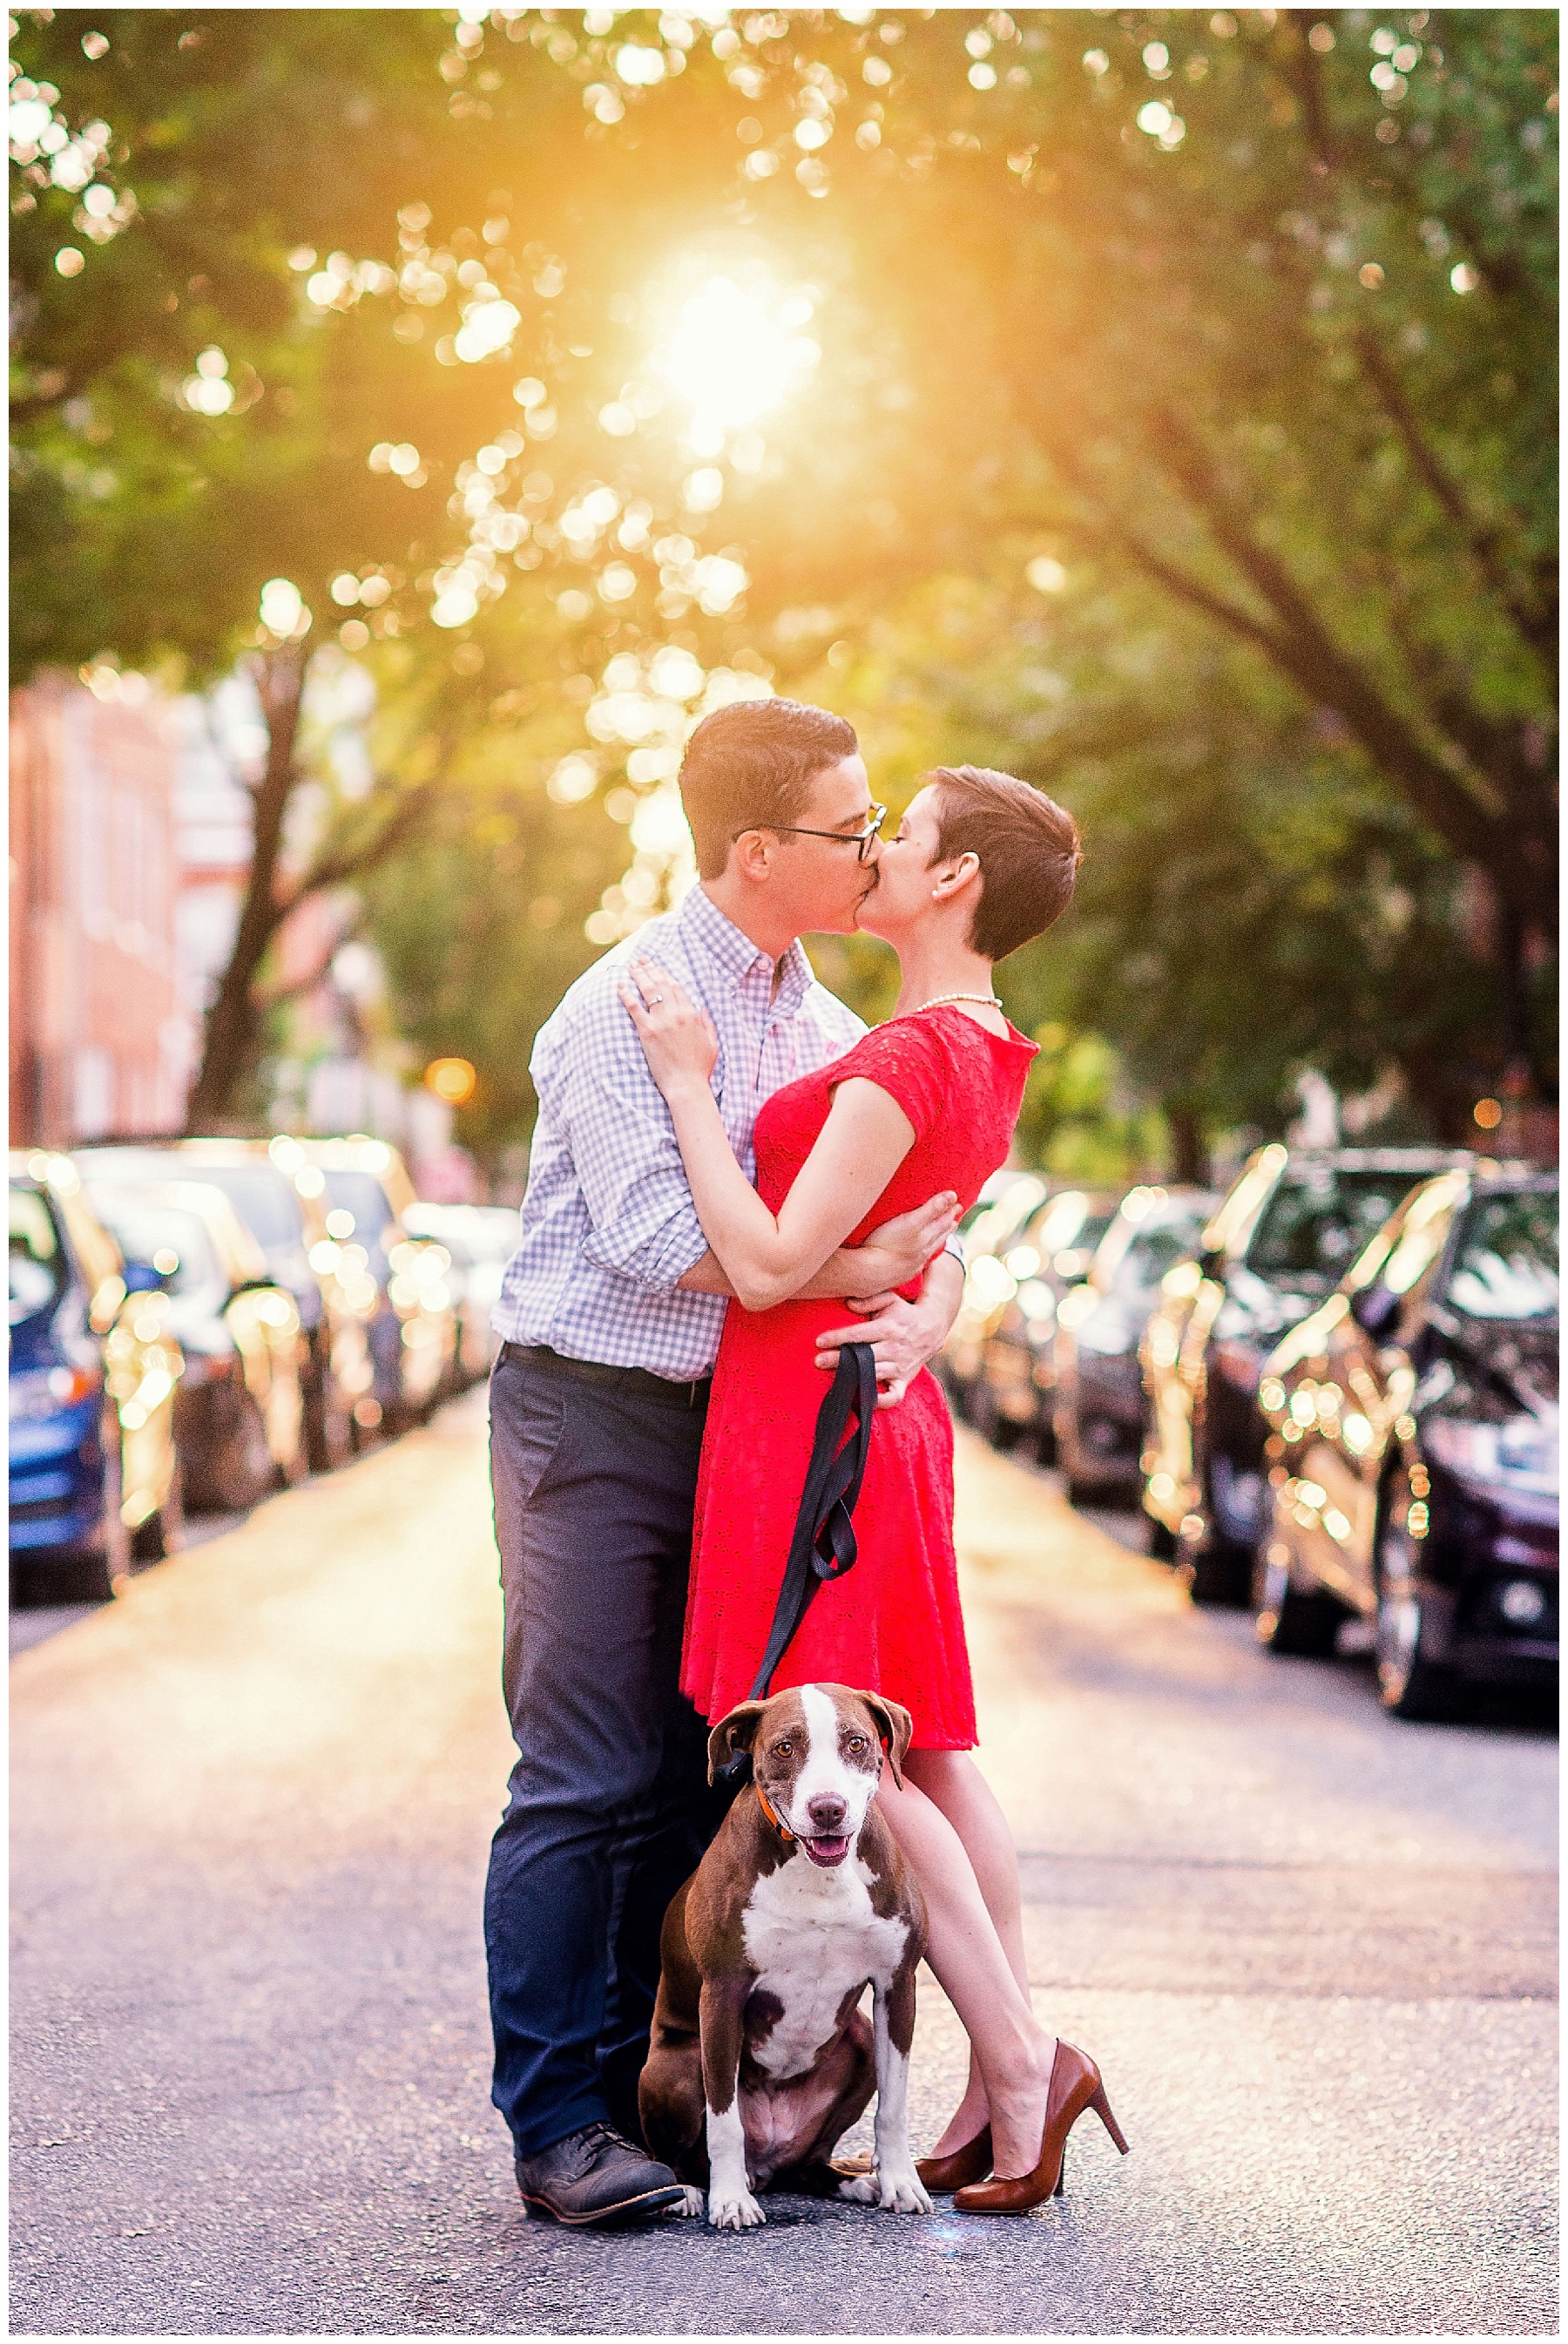 How to Photograph Engagement in a City